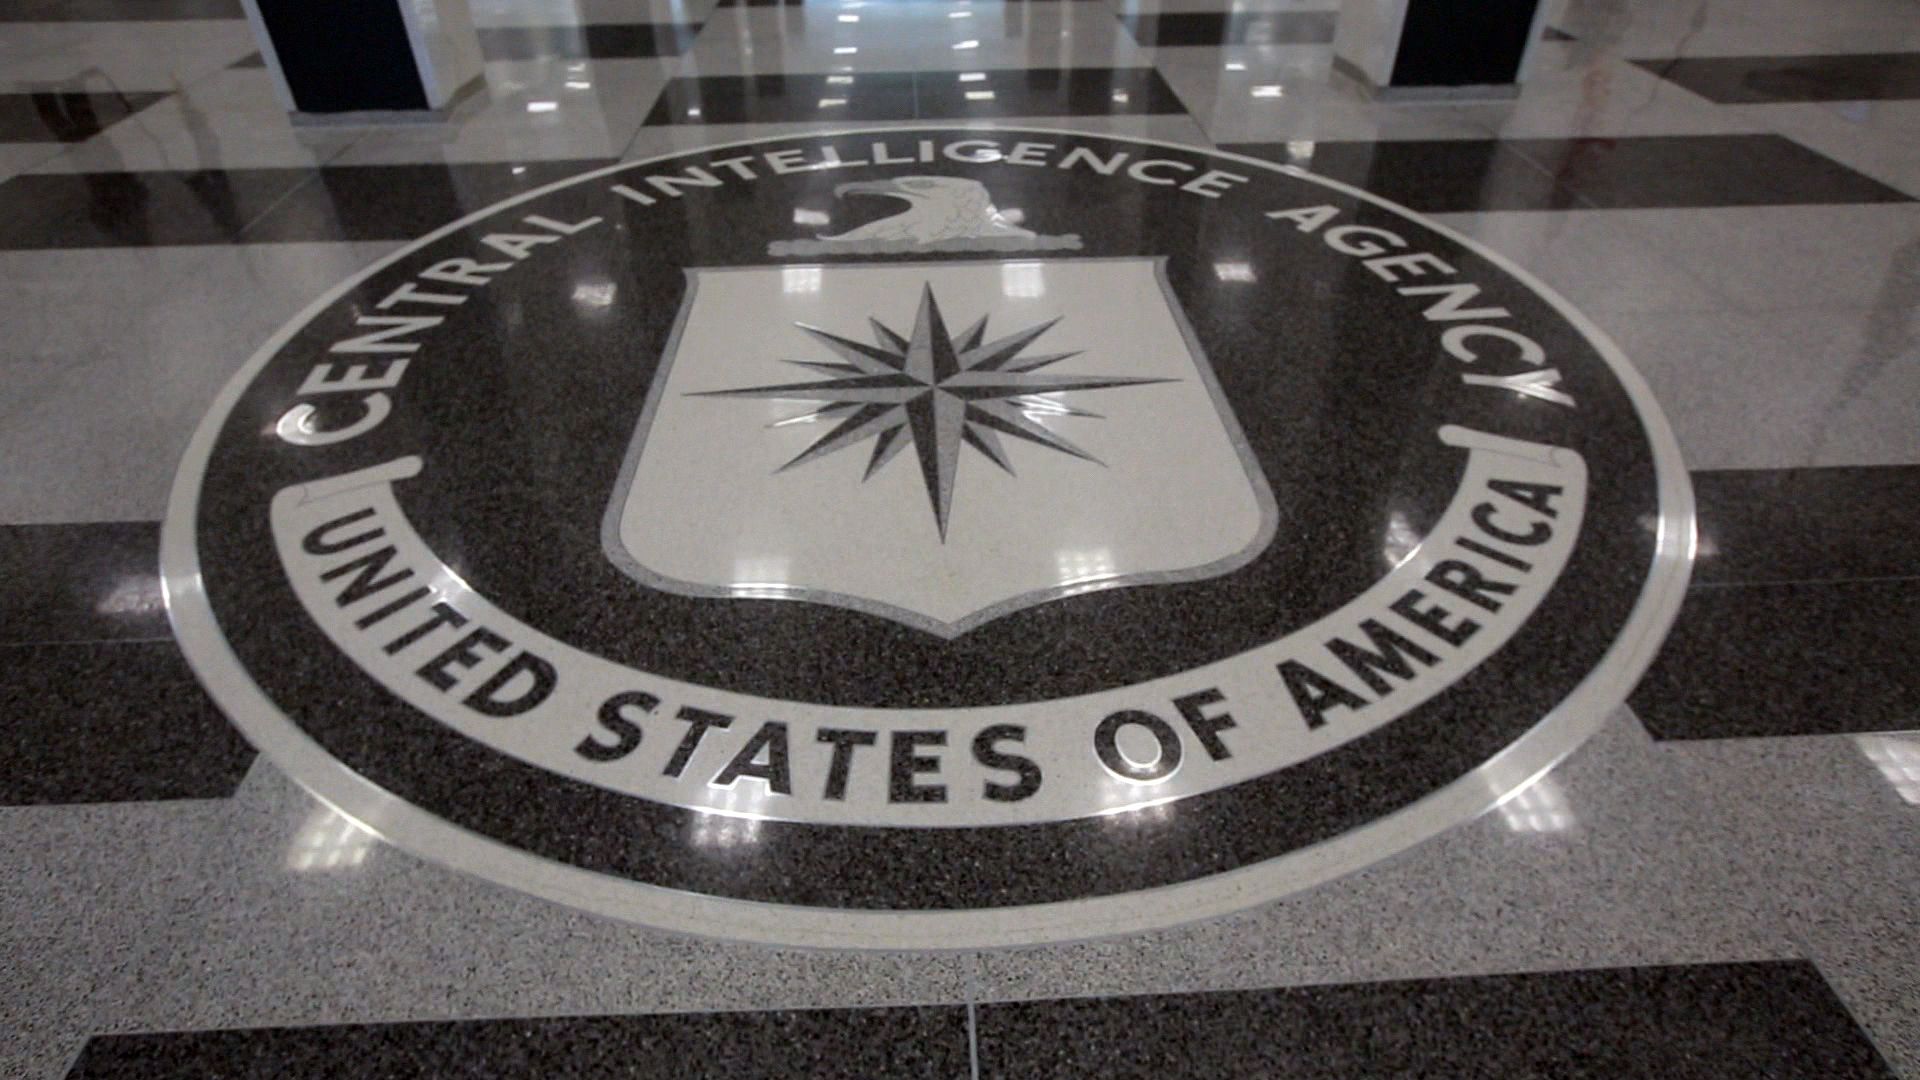 Behind the scenes at the CIA museum